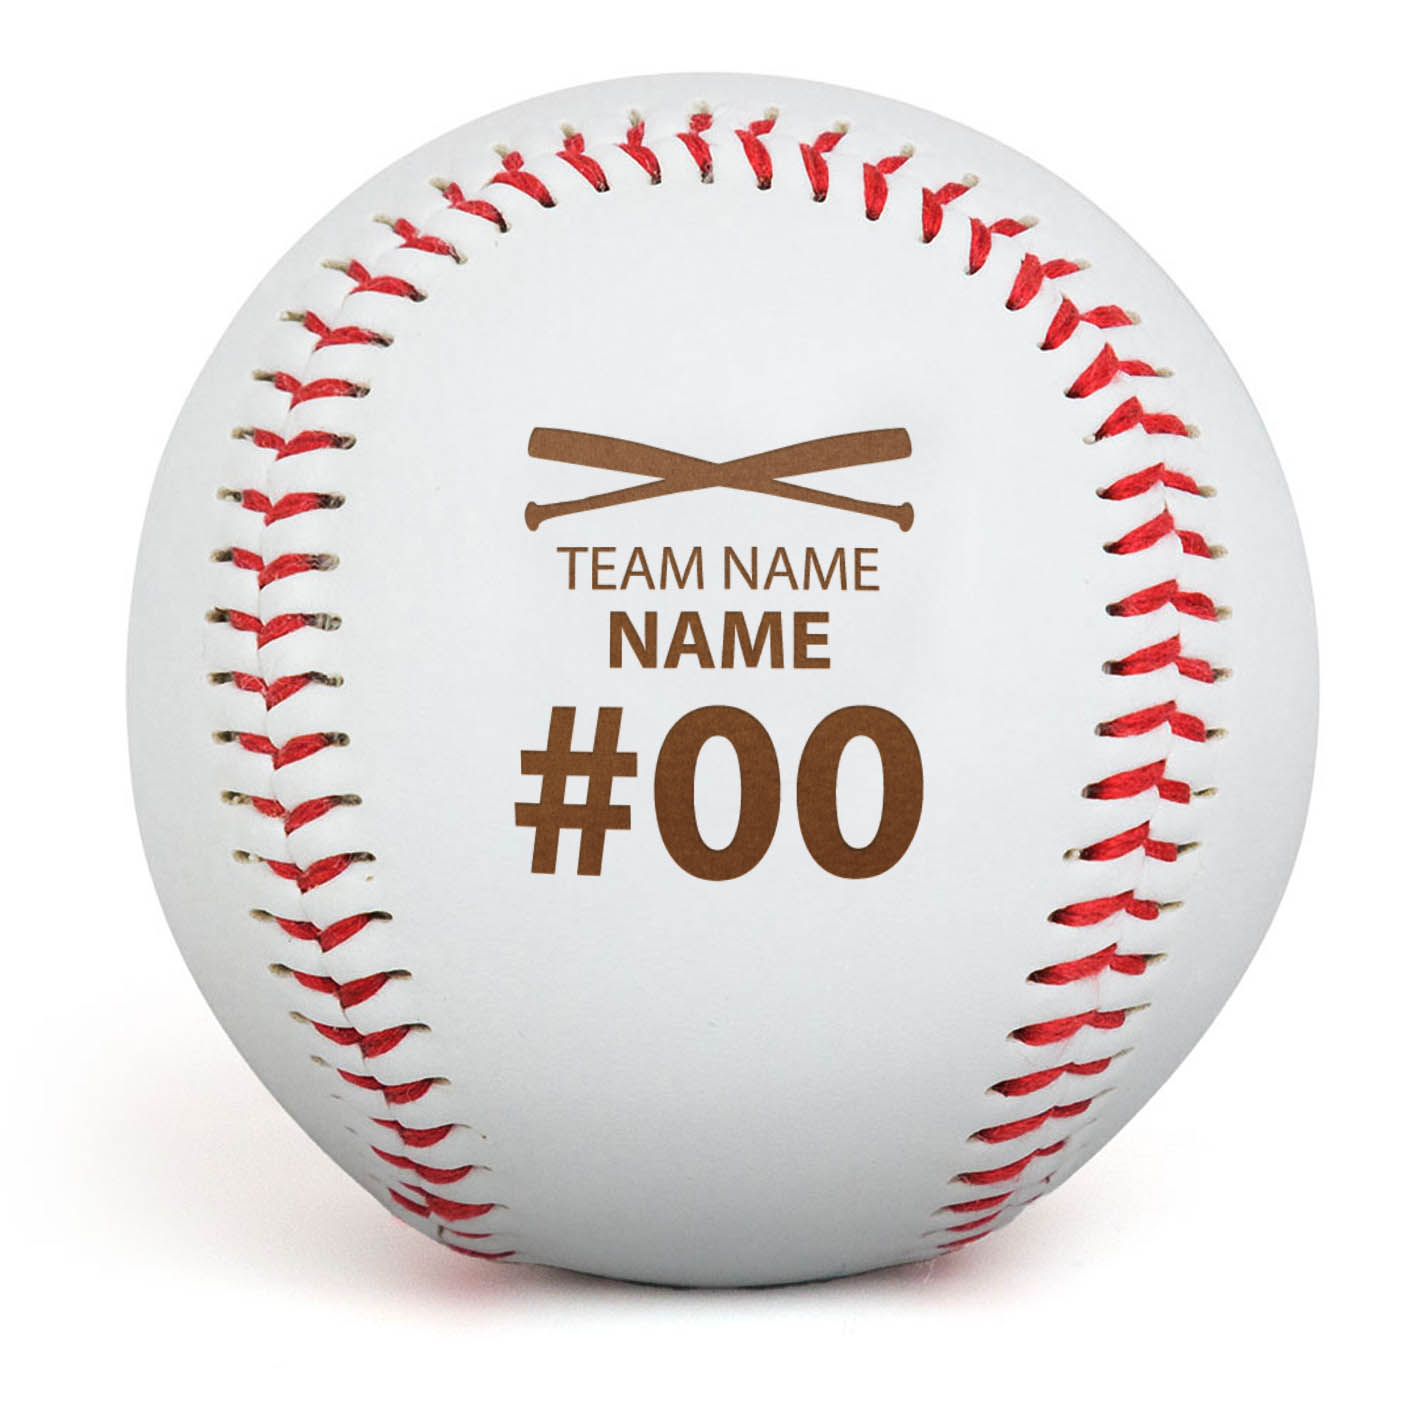 Engraved Baseball - Player Name, Number and Team - Personalization Image